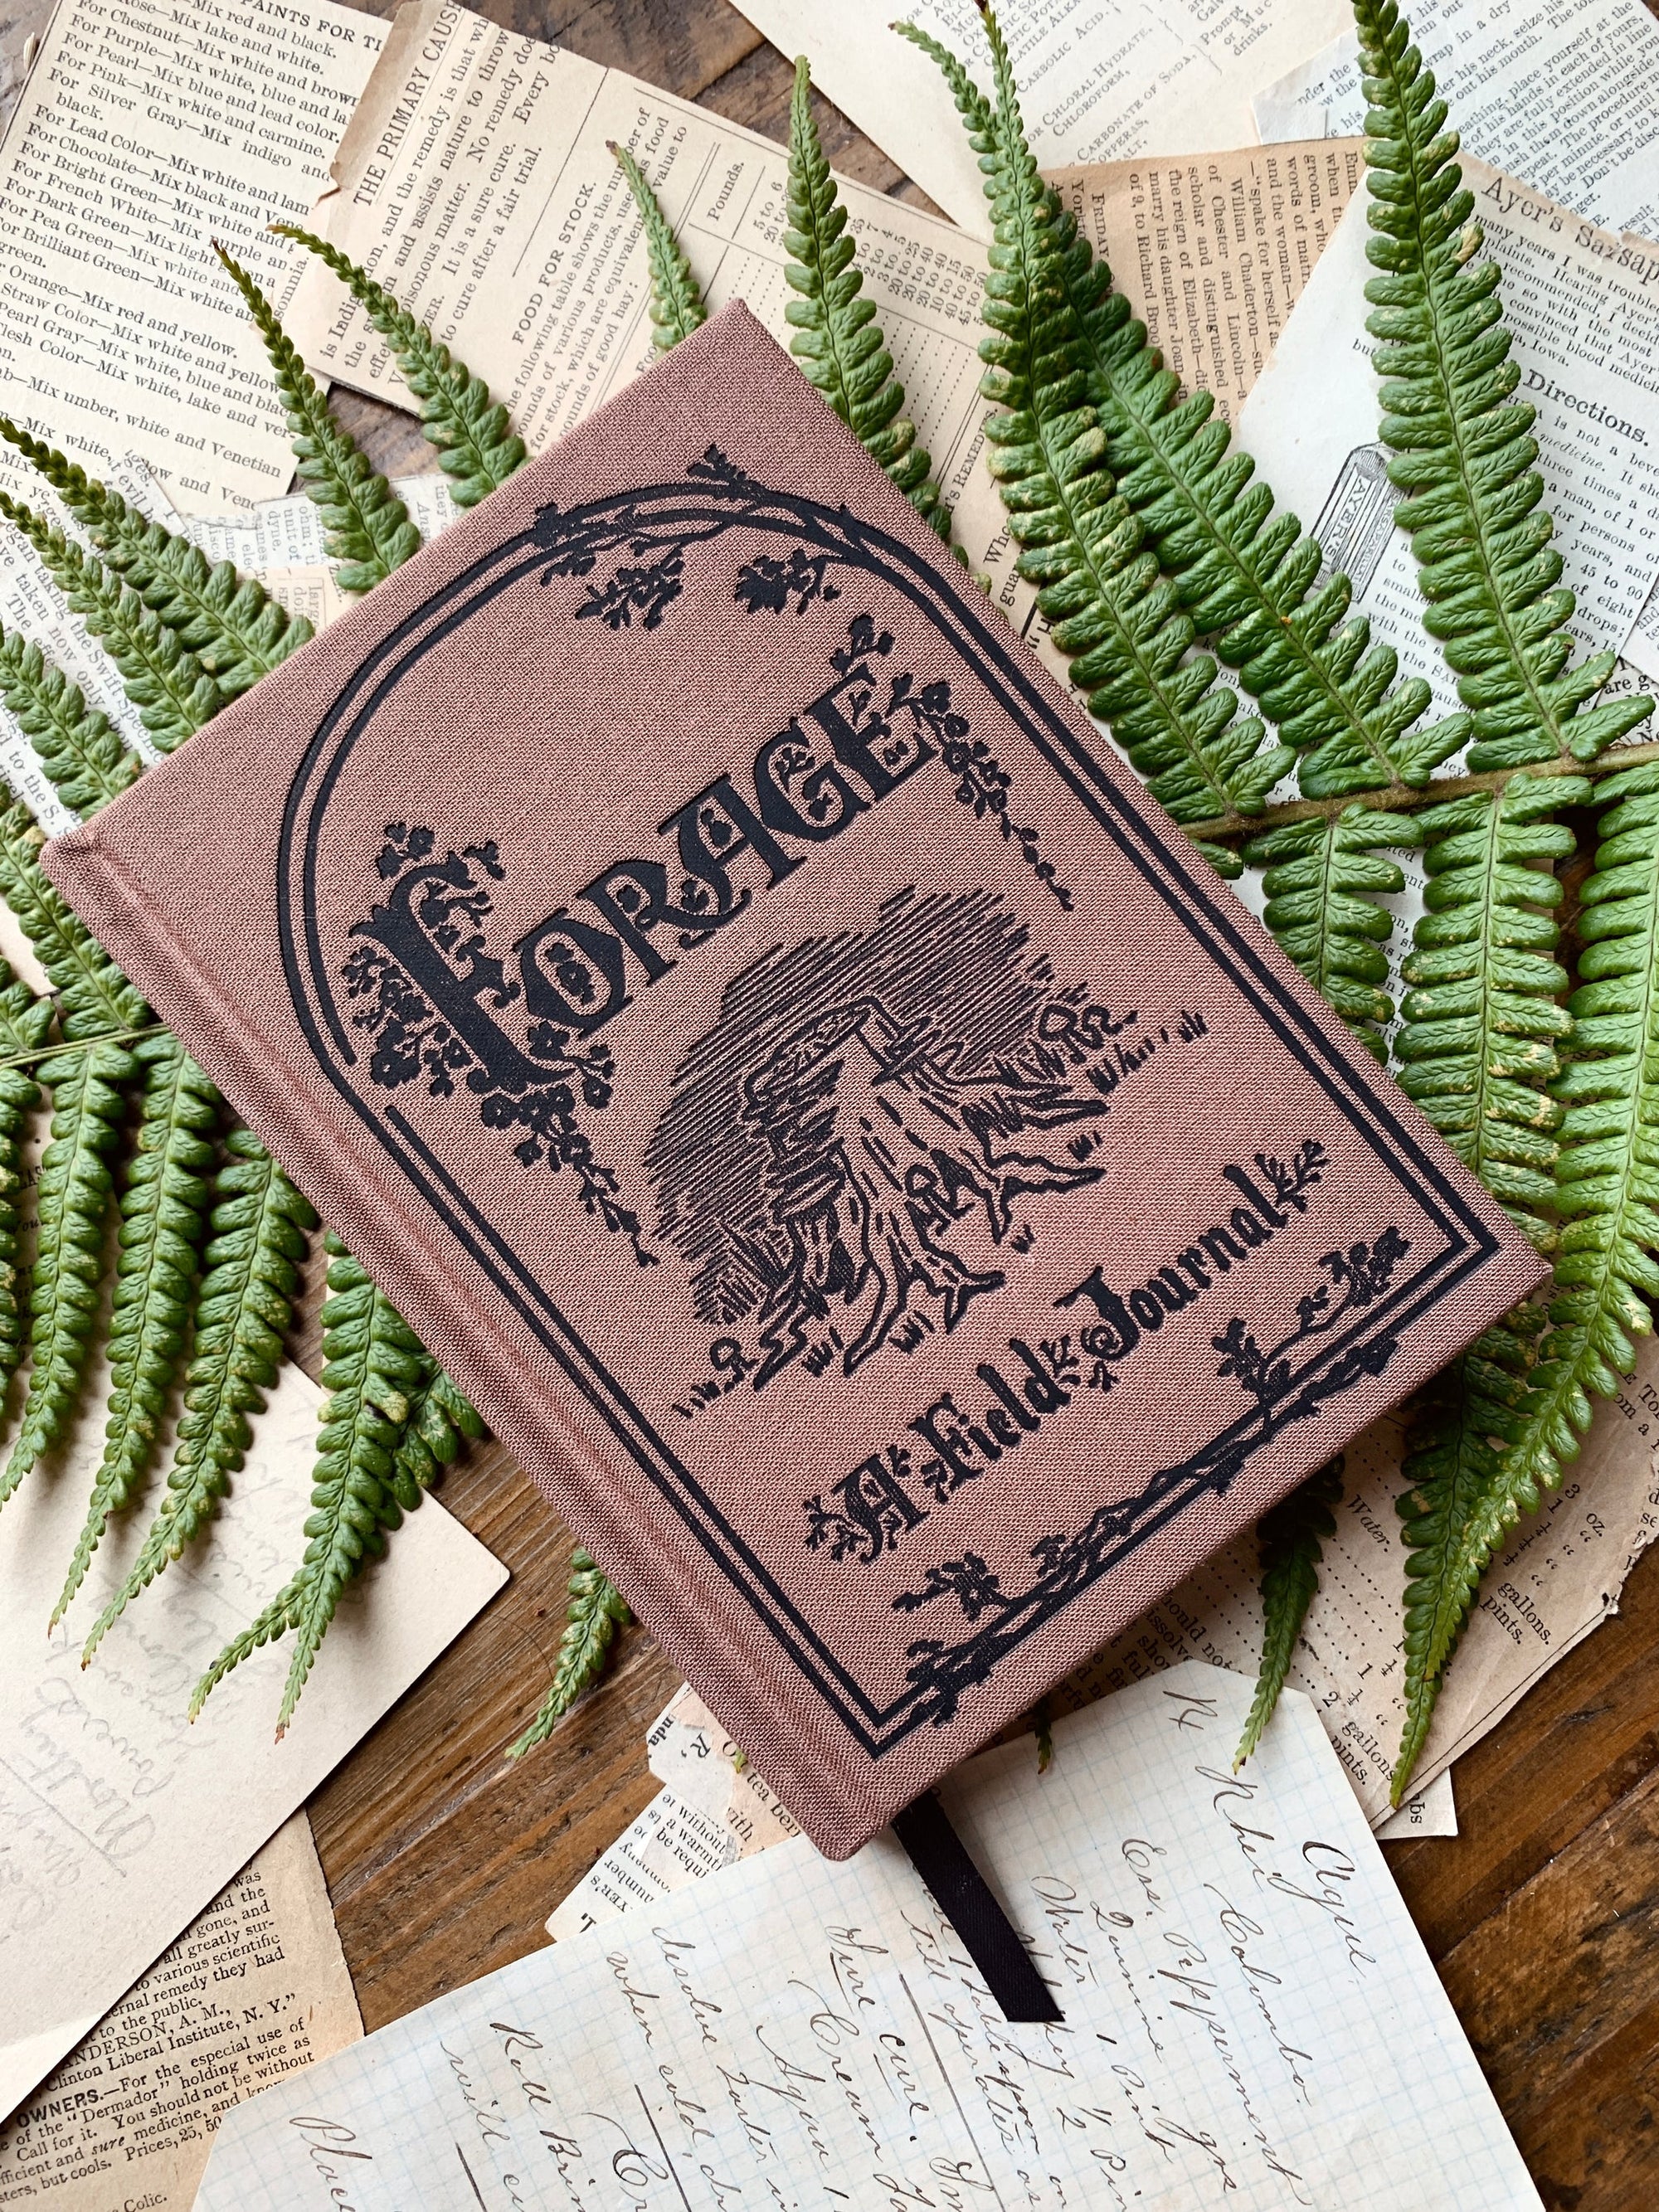 Foraging Journal